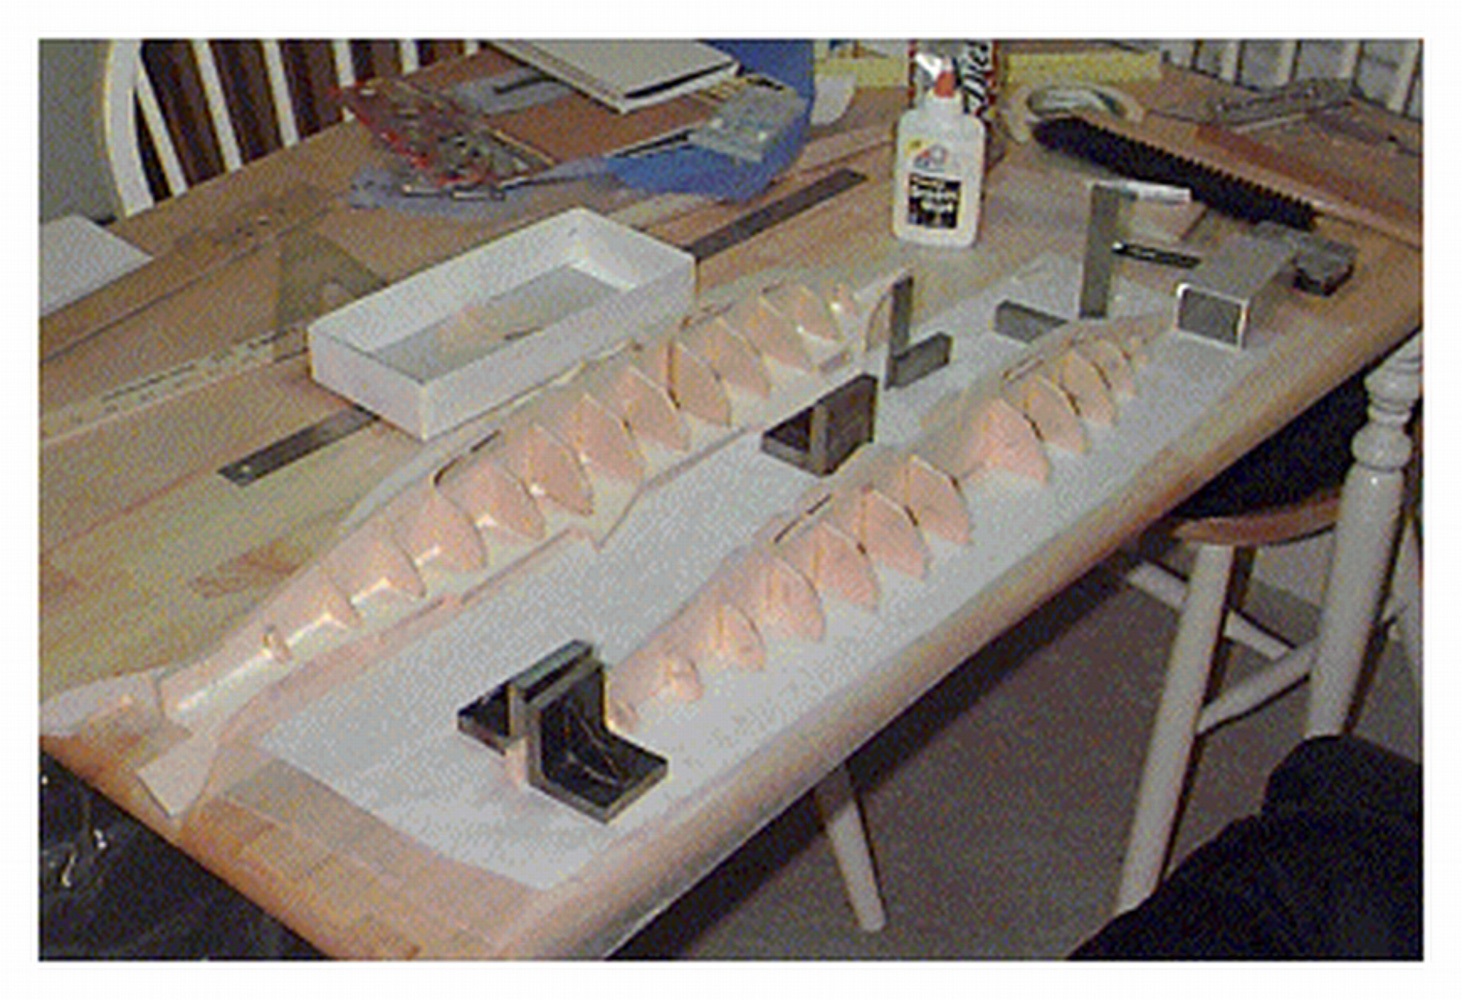 Assembly of the bulkheads with the keel pieces